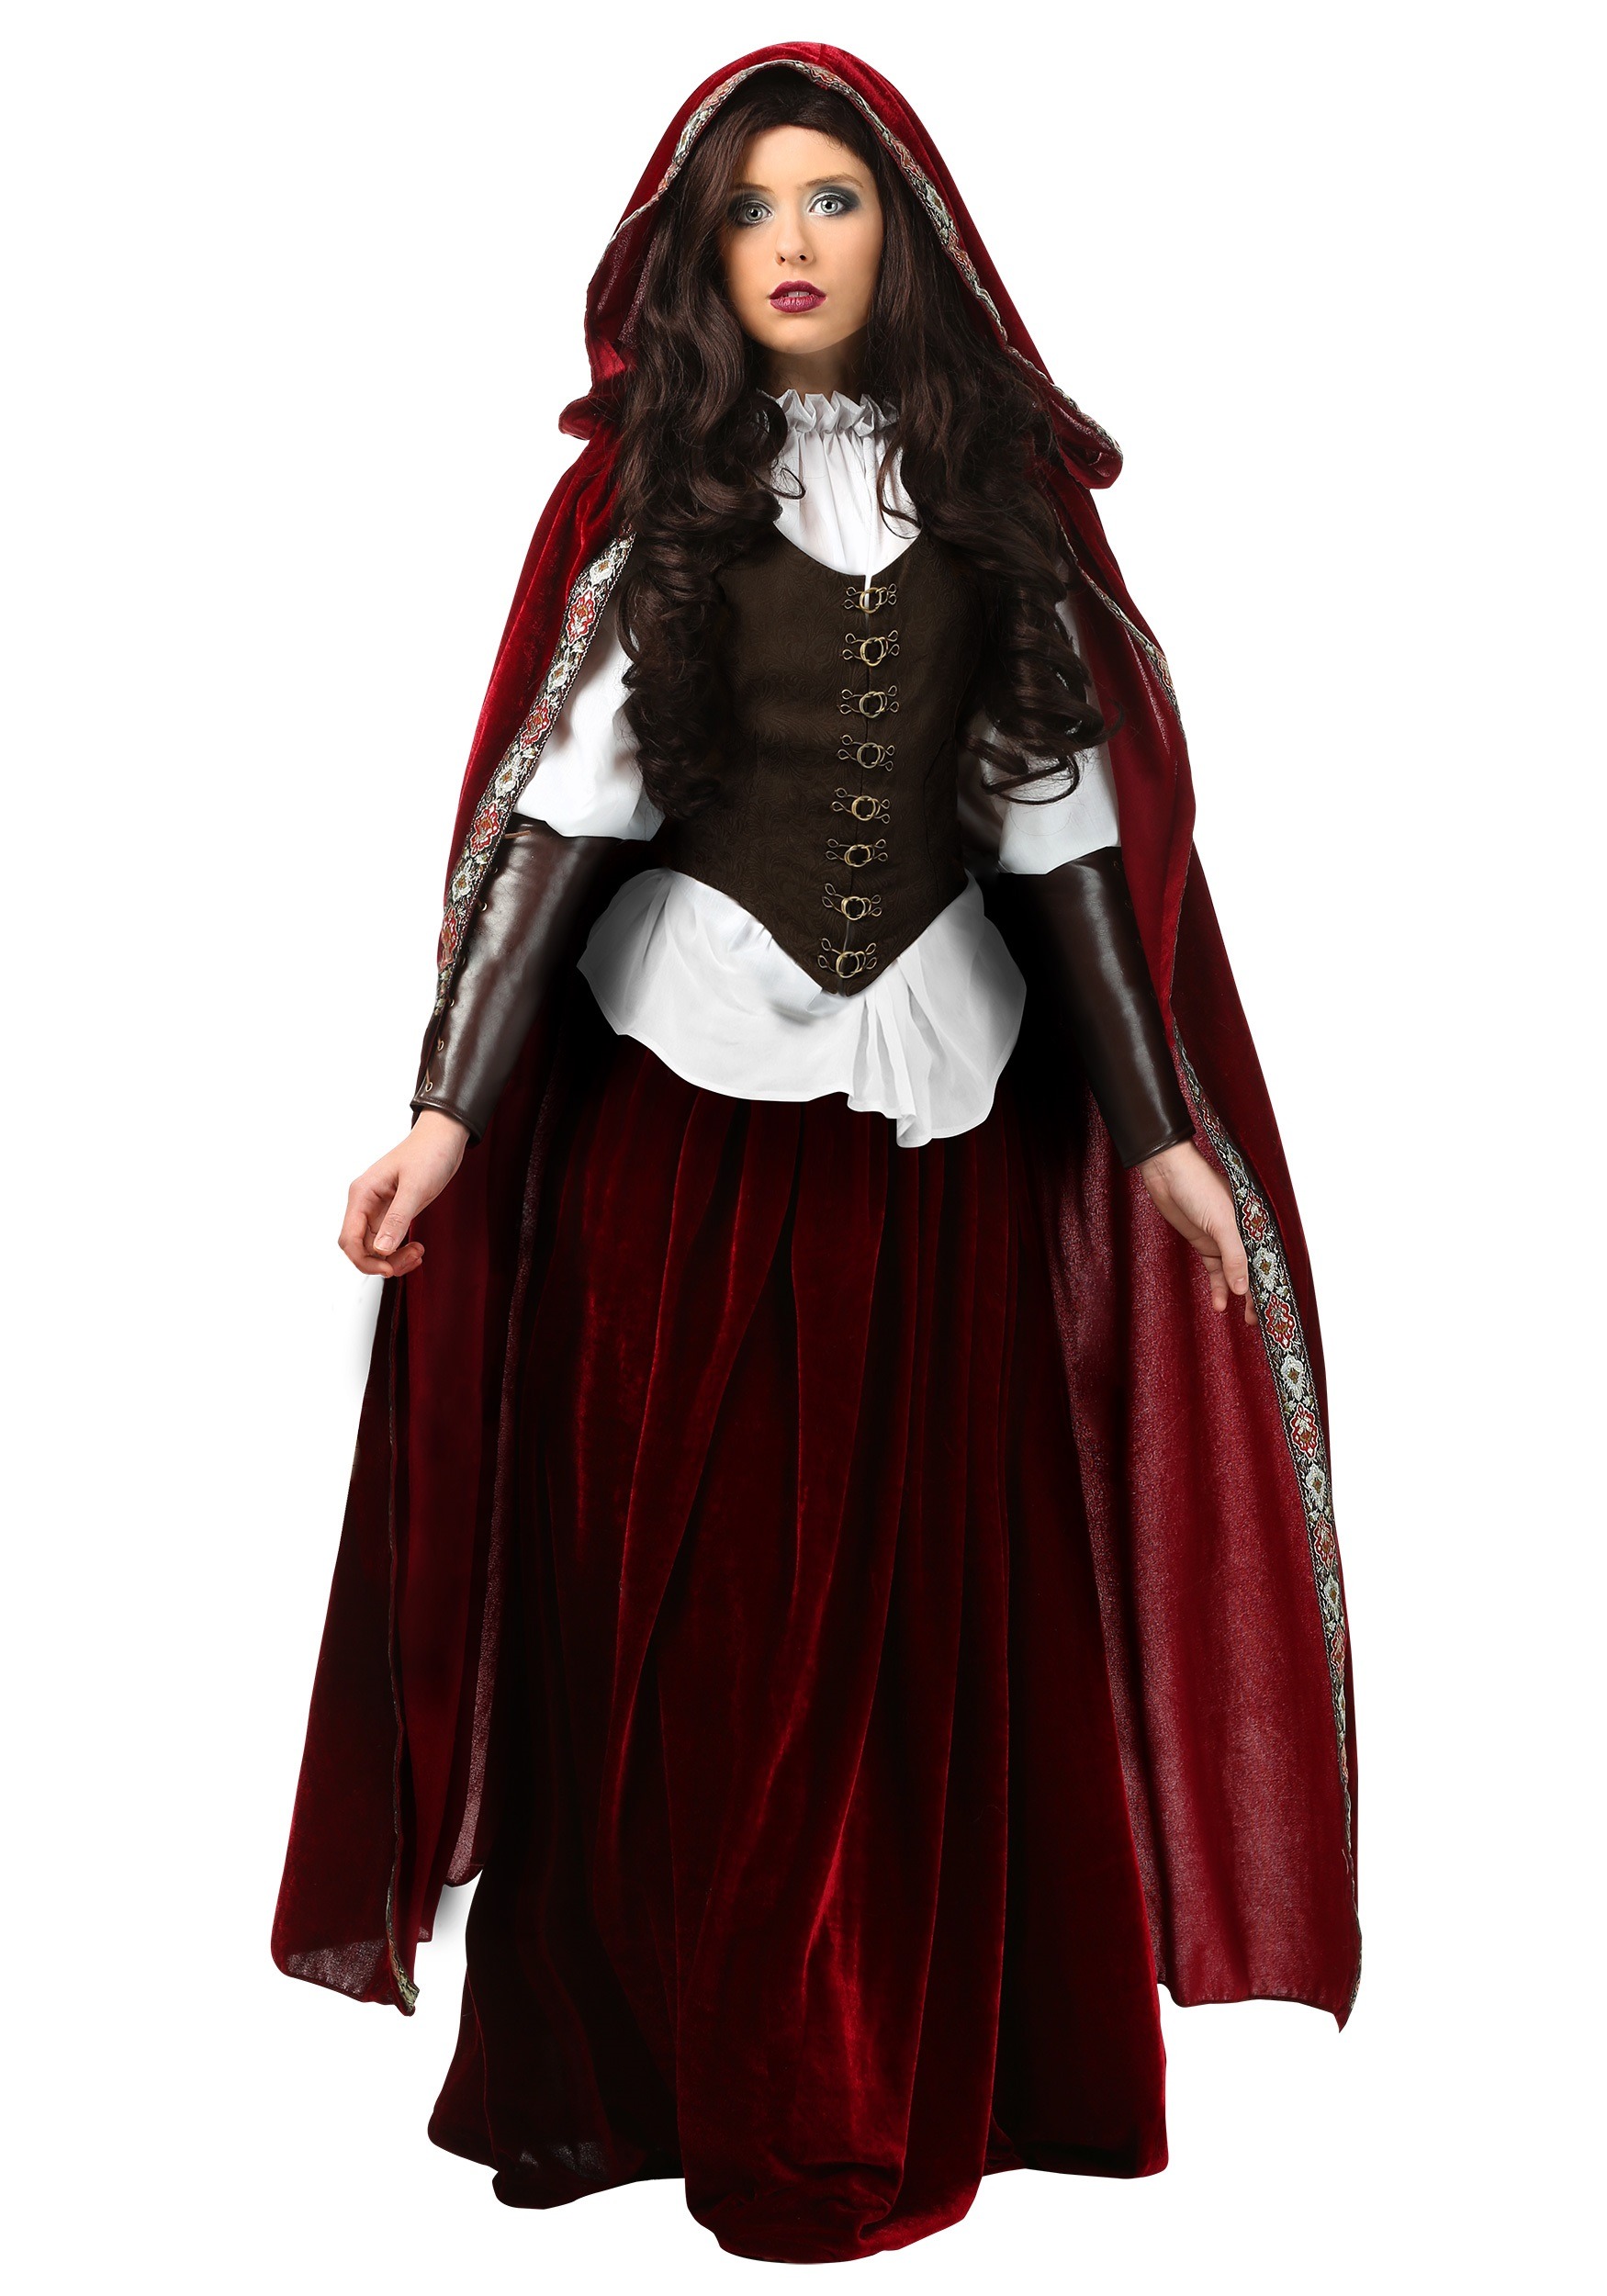 Image of Deluxe Red Riding Hood Plus Size Women's Costume | Exclusive ID FUN2382PL-6X